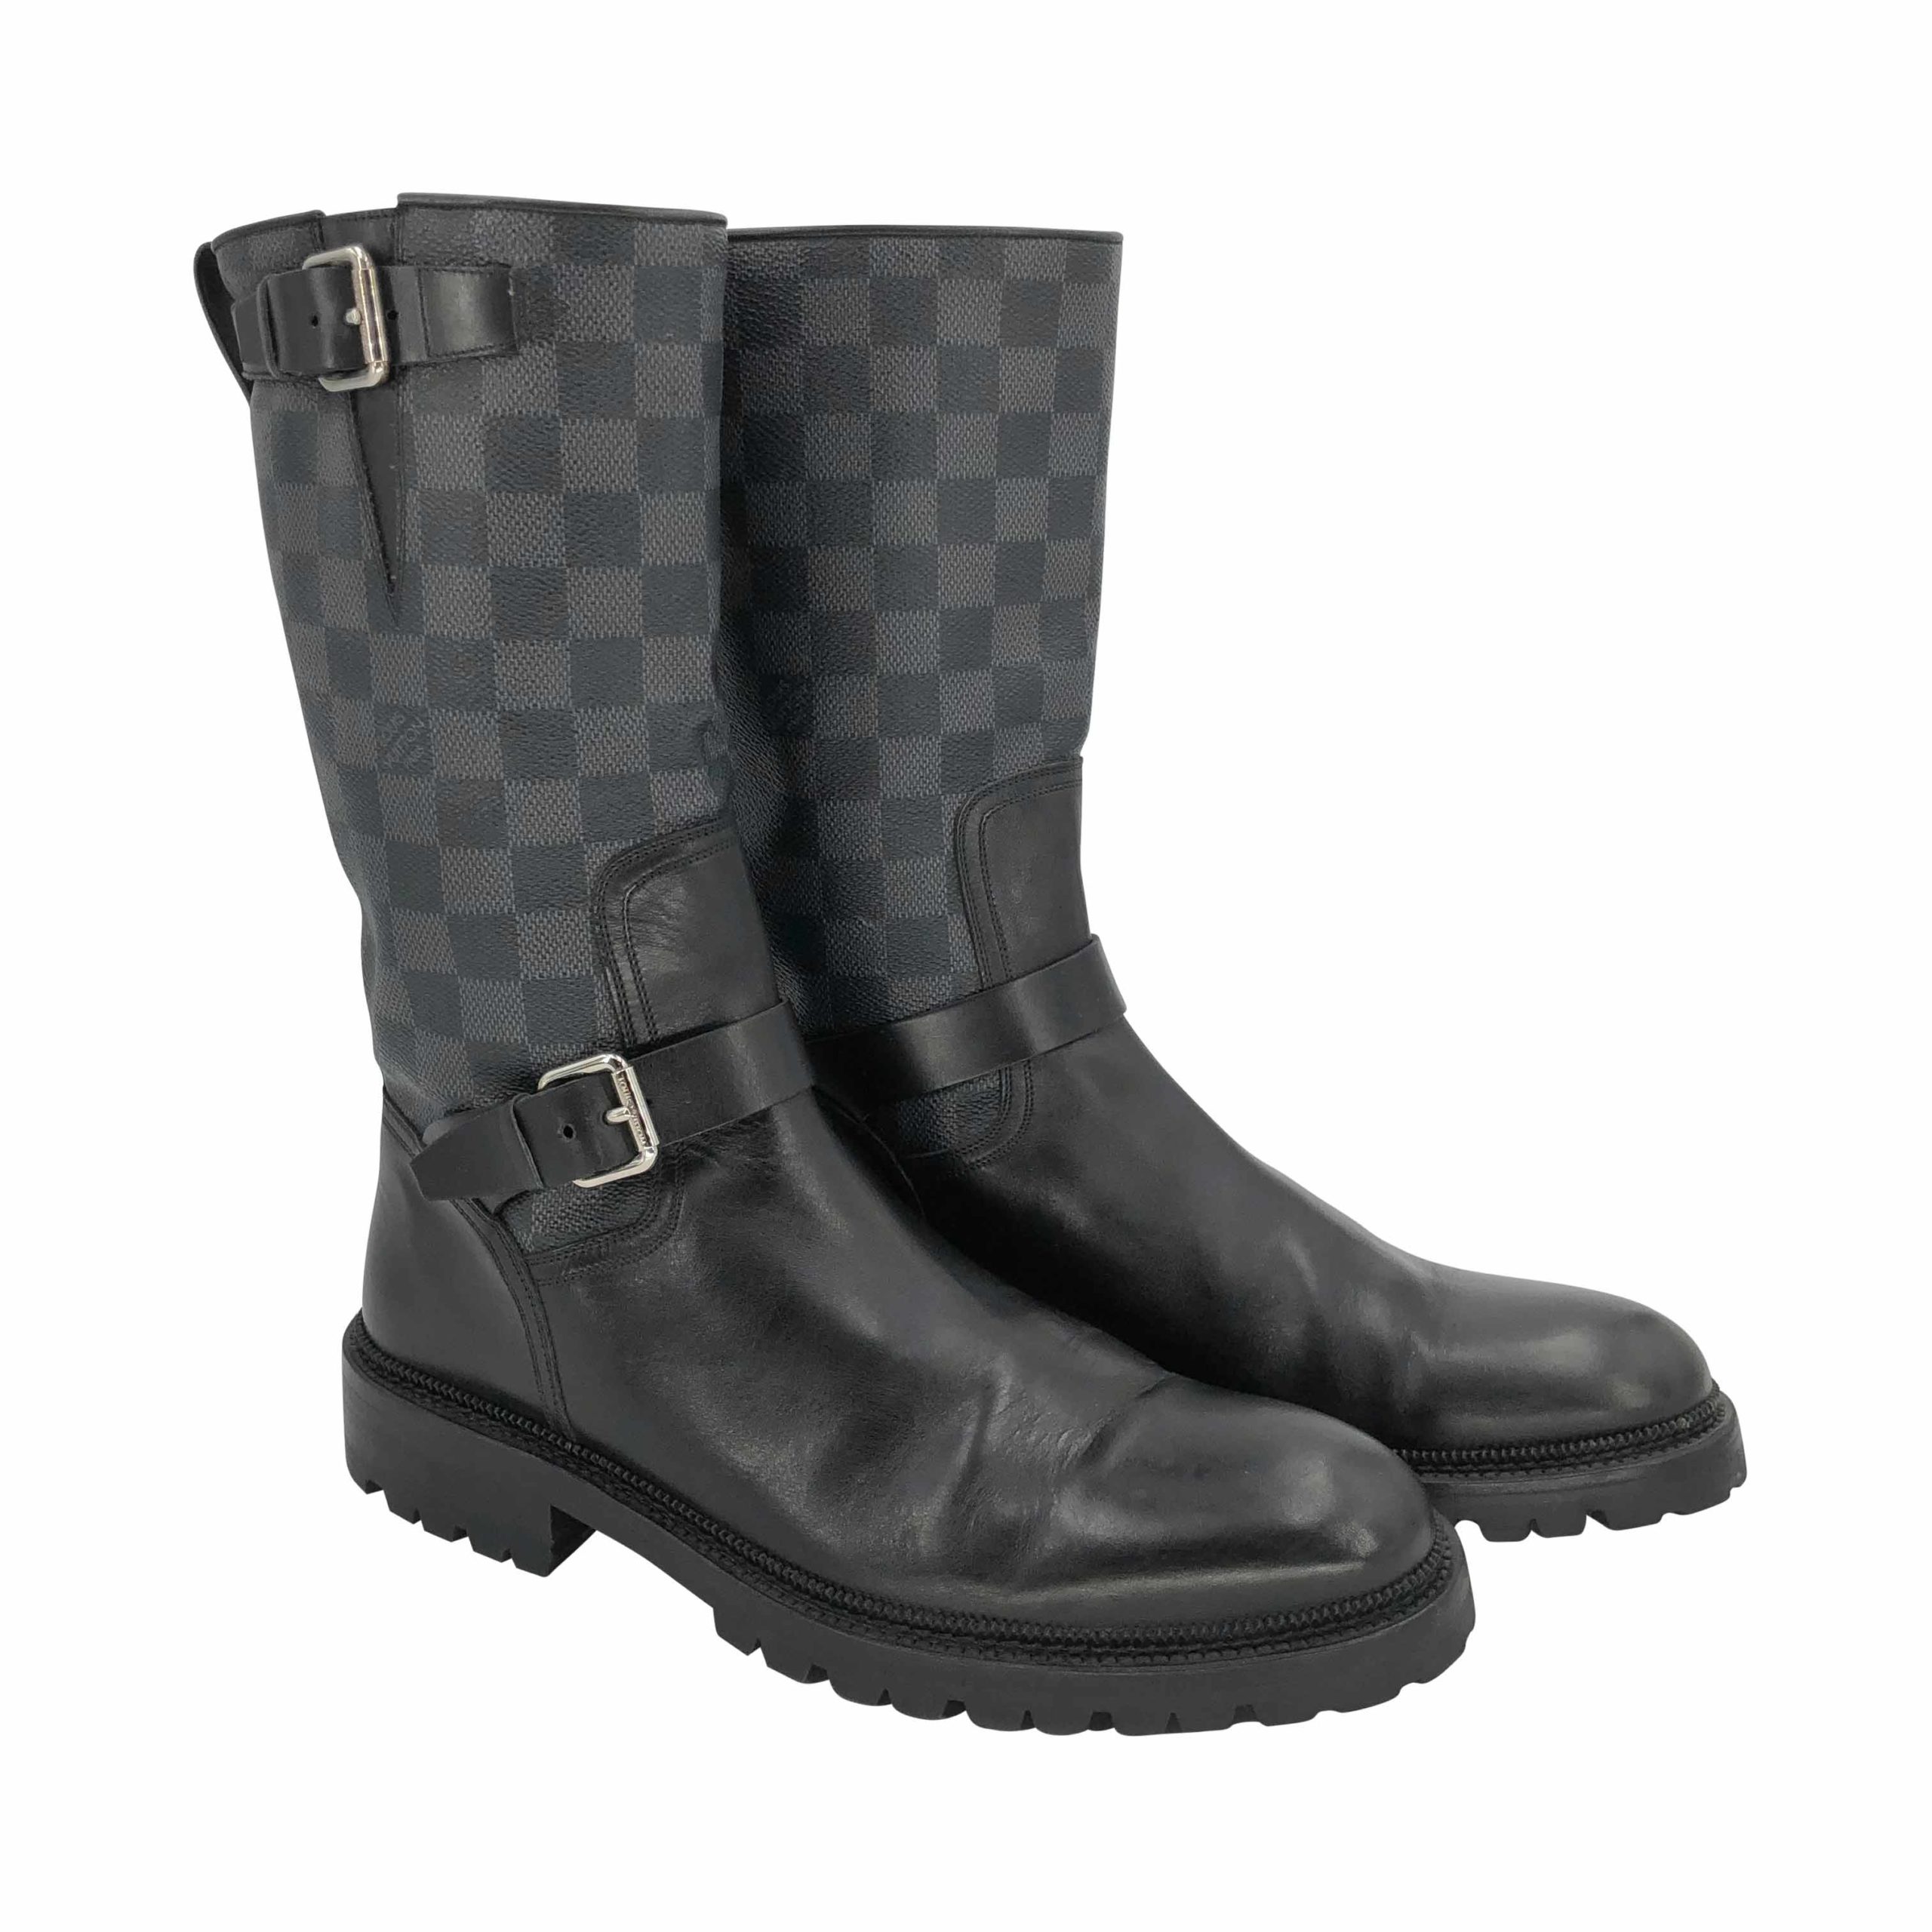 Boots Louis Vuitton Grey size 5 UK in Rubber - 33855303